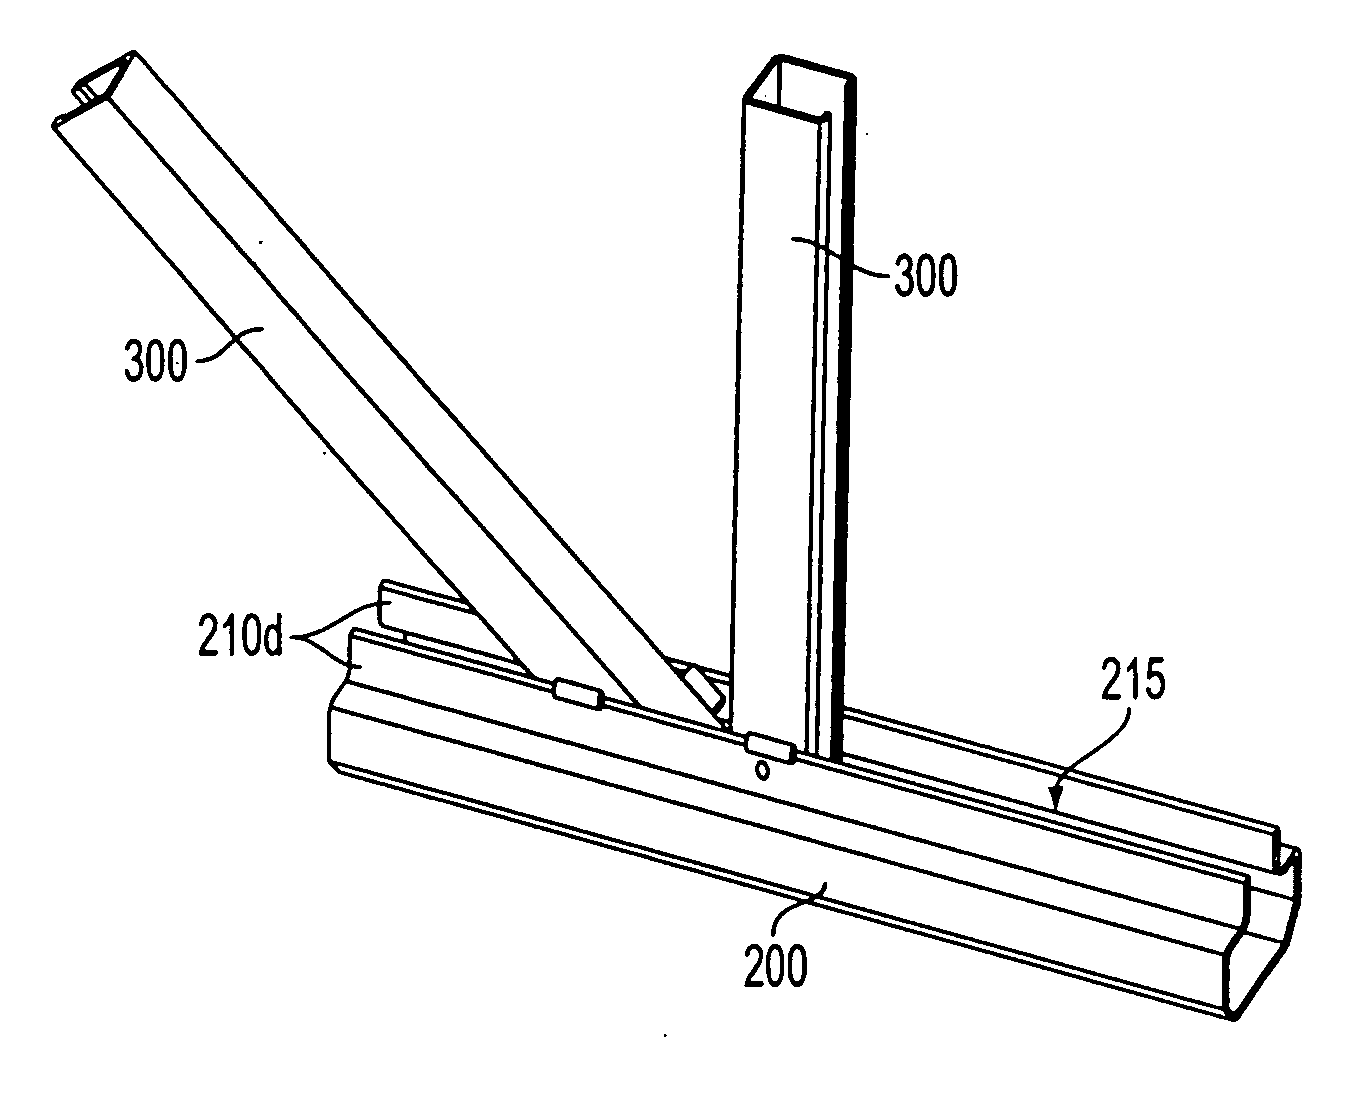 Cold-formed steel joists